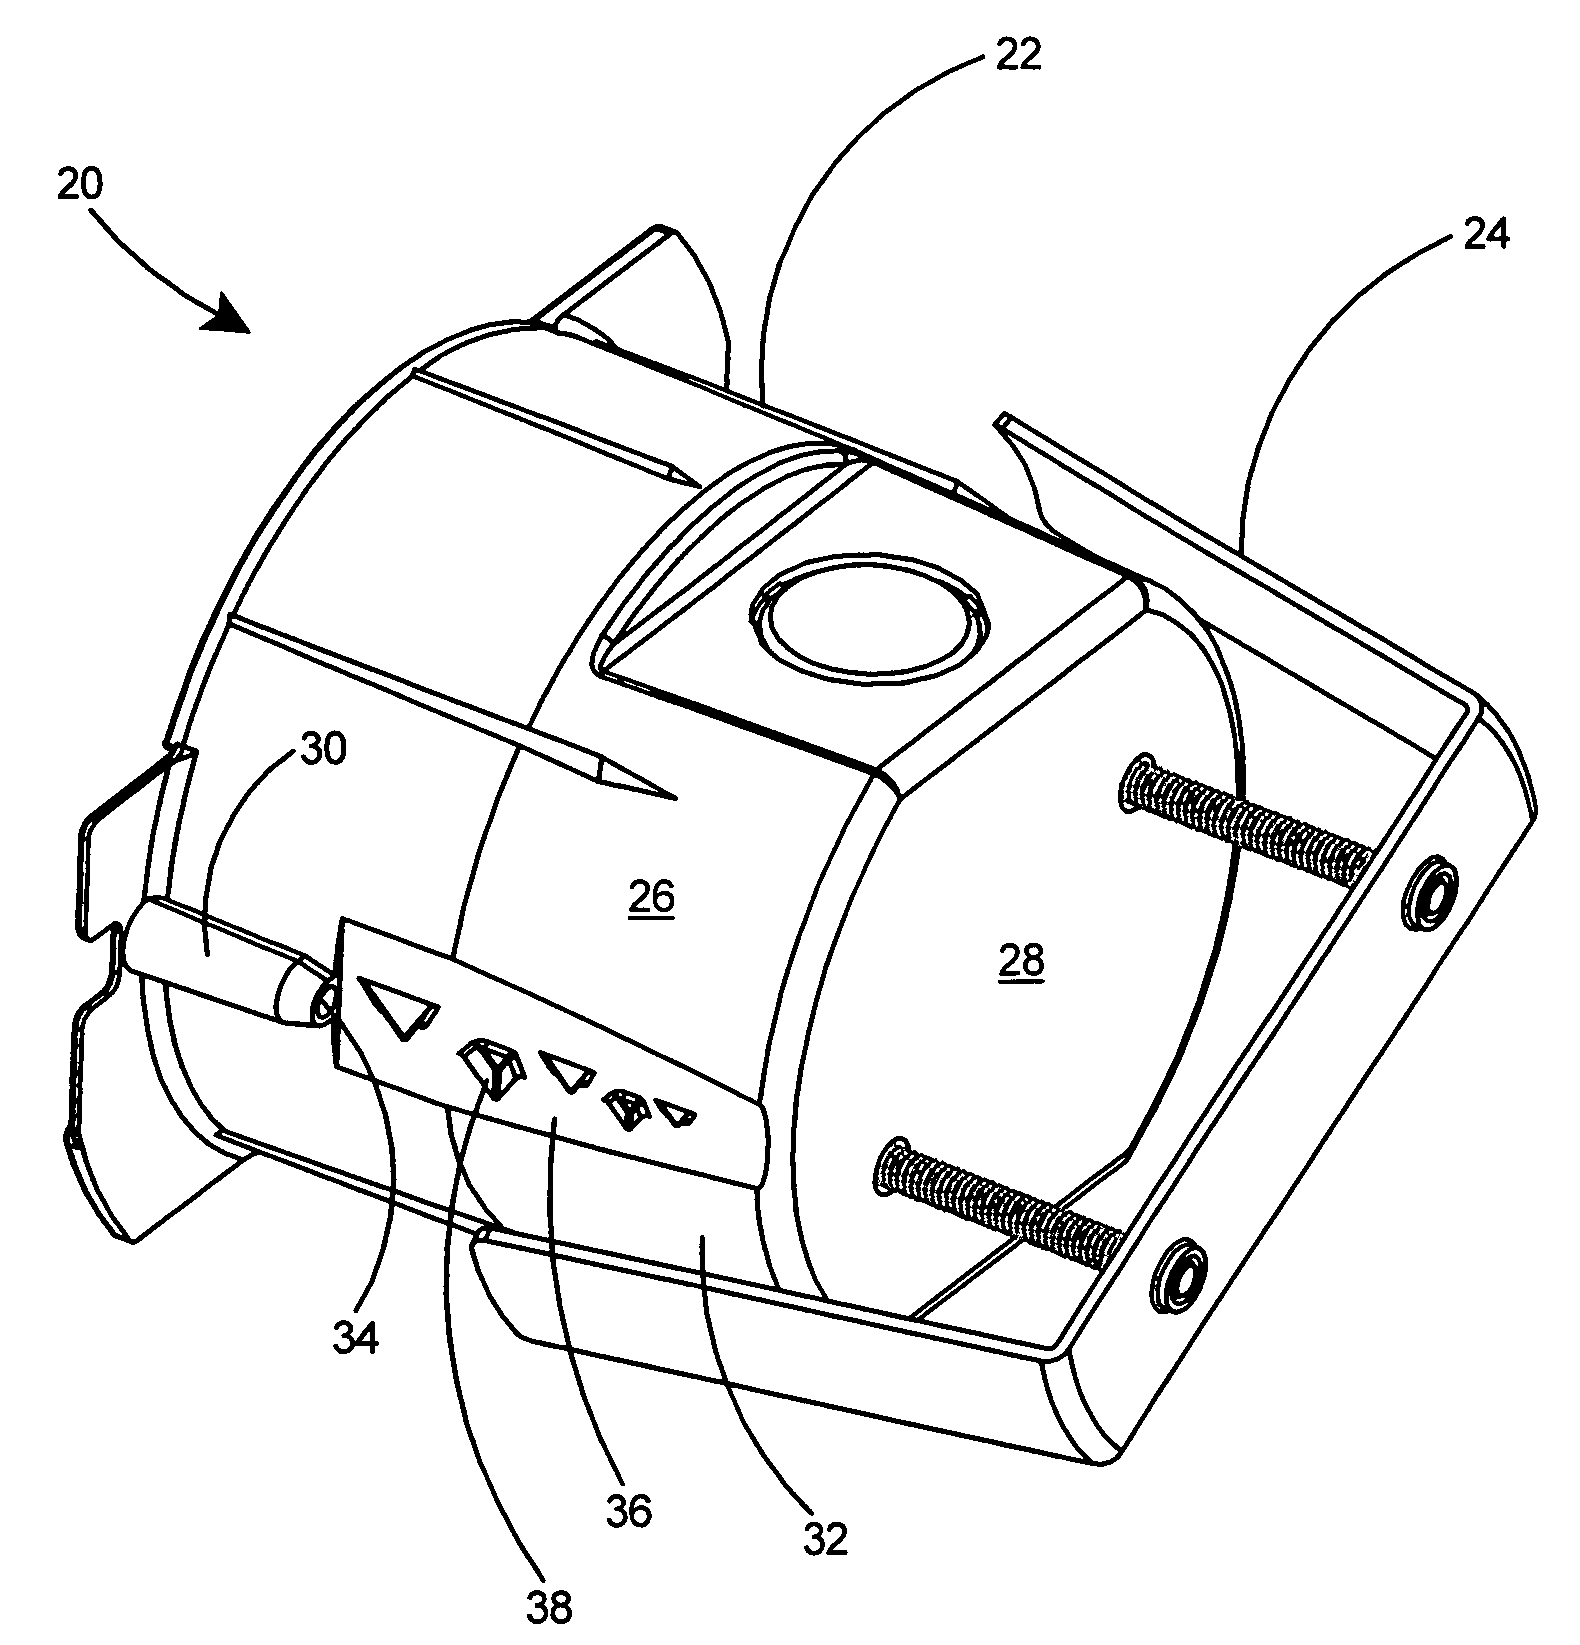 Hole saw electrical box for direct mounting of electrical fixtures or devices to a wall